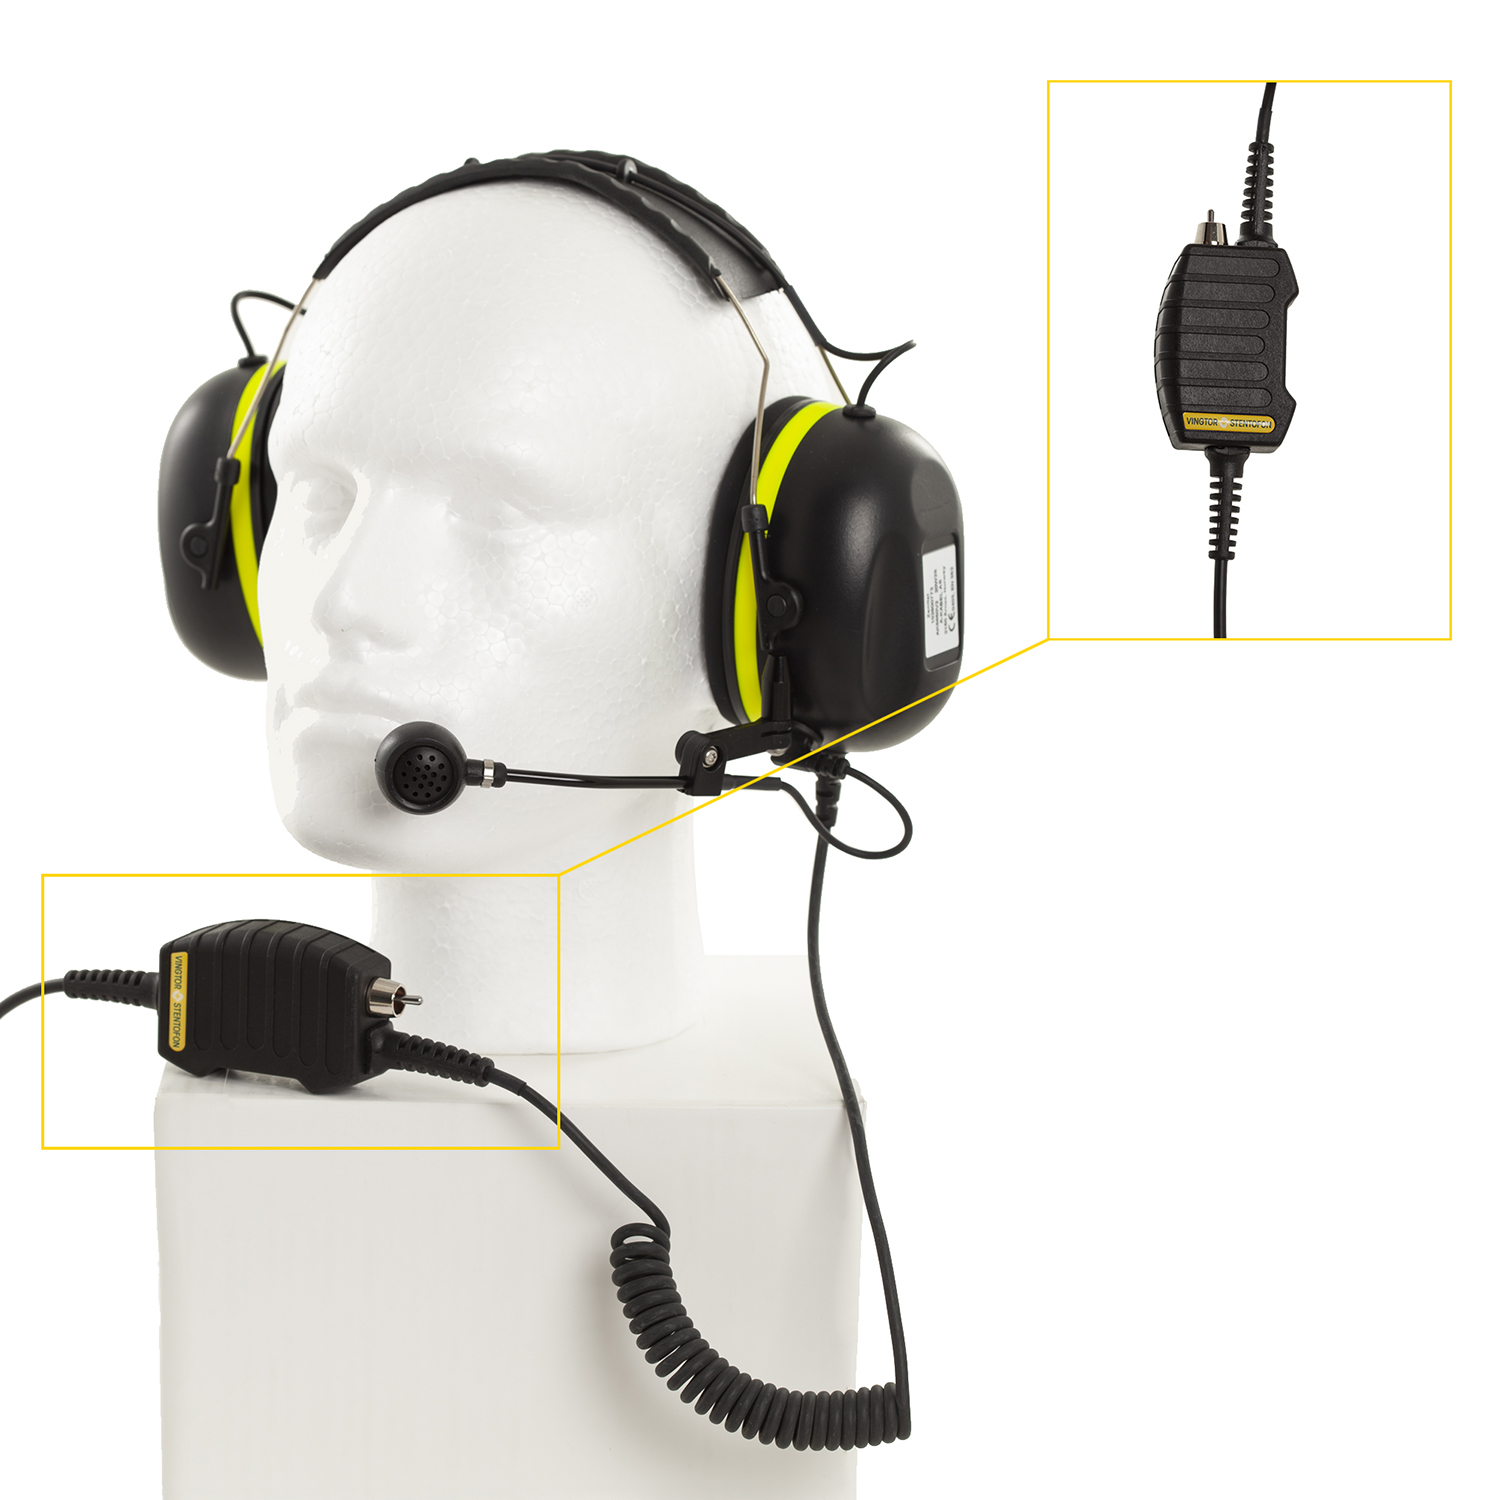 1020600773 VSP36PELPA Portable headset w/boom mic. on/off switch box and 10M cable